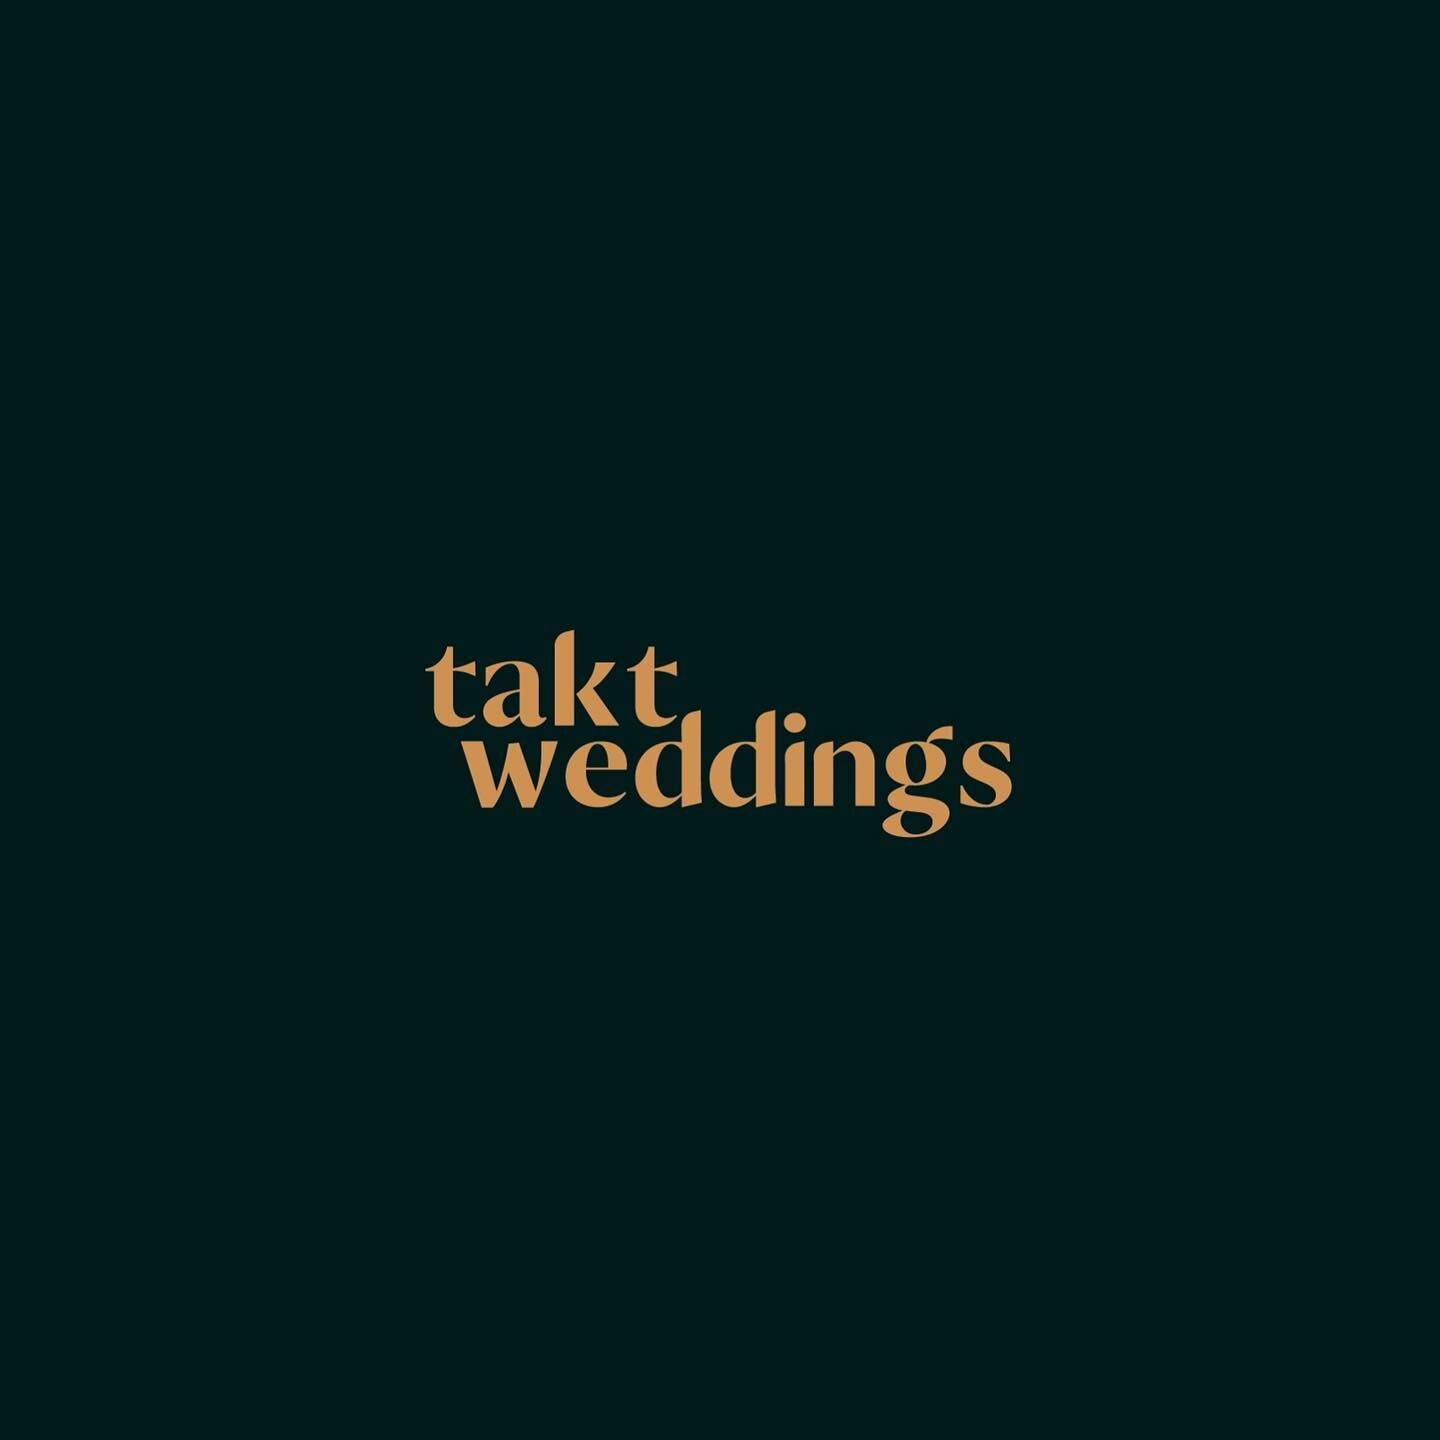 @weddingsbytakt 💒 We&rsquo;ve created a new space for our wedding films &amp; photography 💍 Please give the page a follow and if you&rsquo;re getting married soon you know who to call 👀 

Swipe to see some content from our wedding shoots over the 